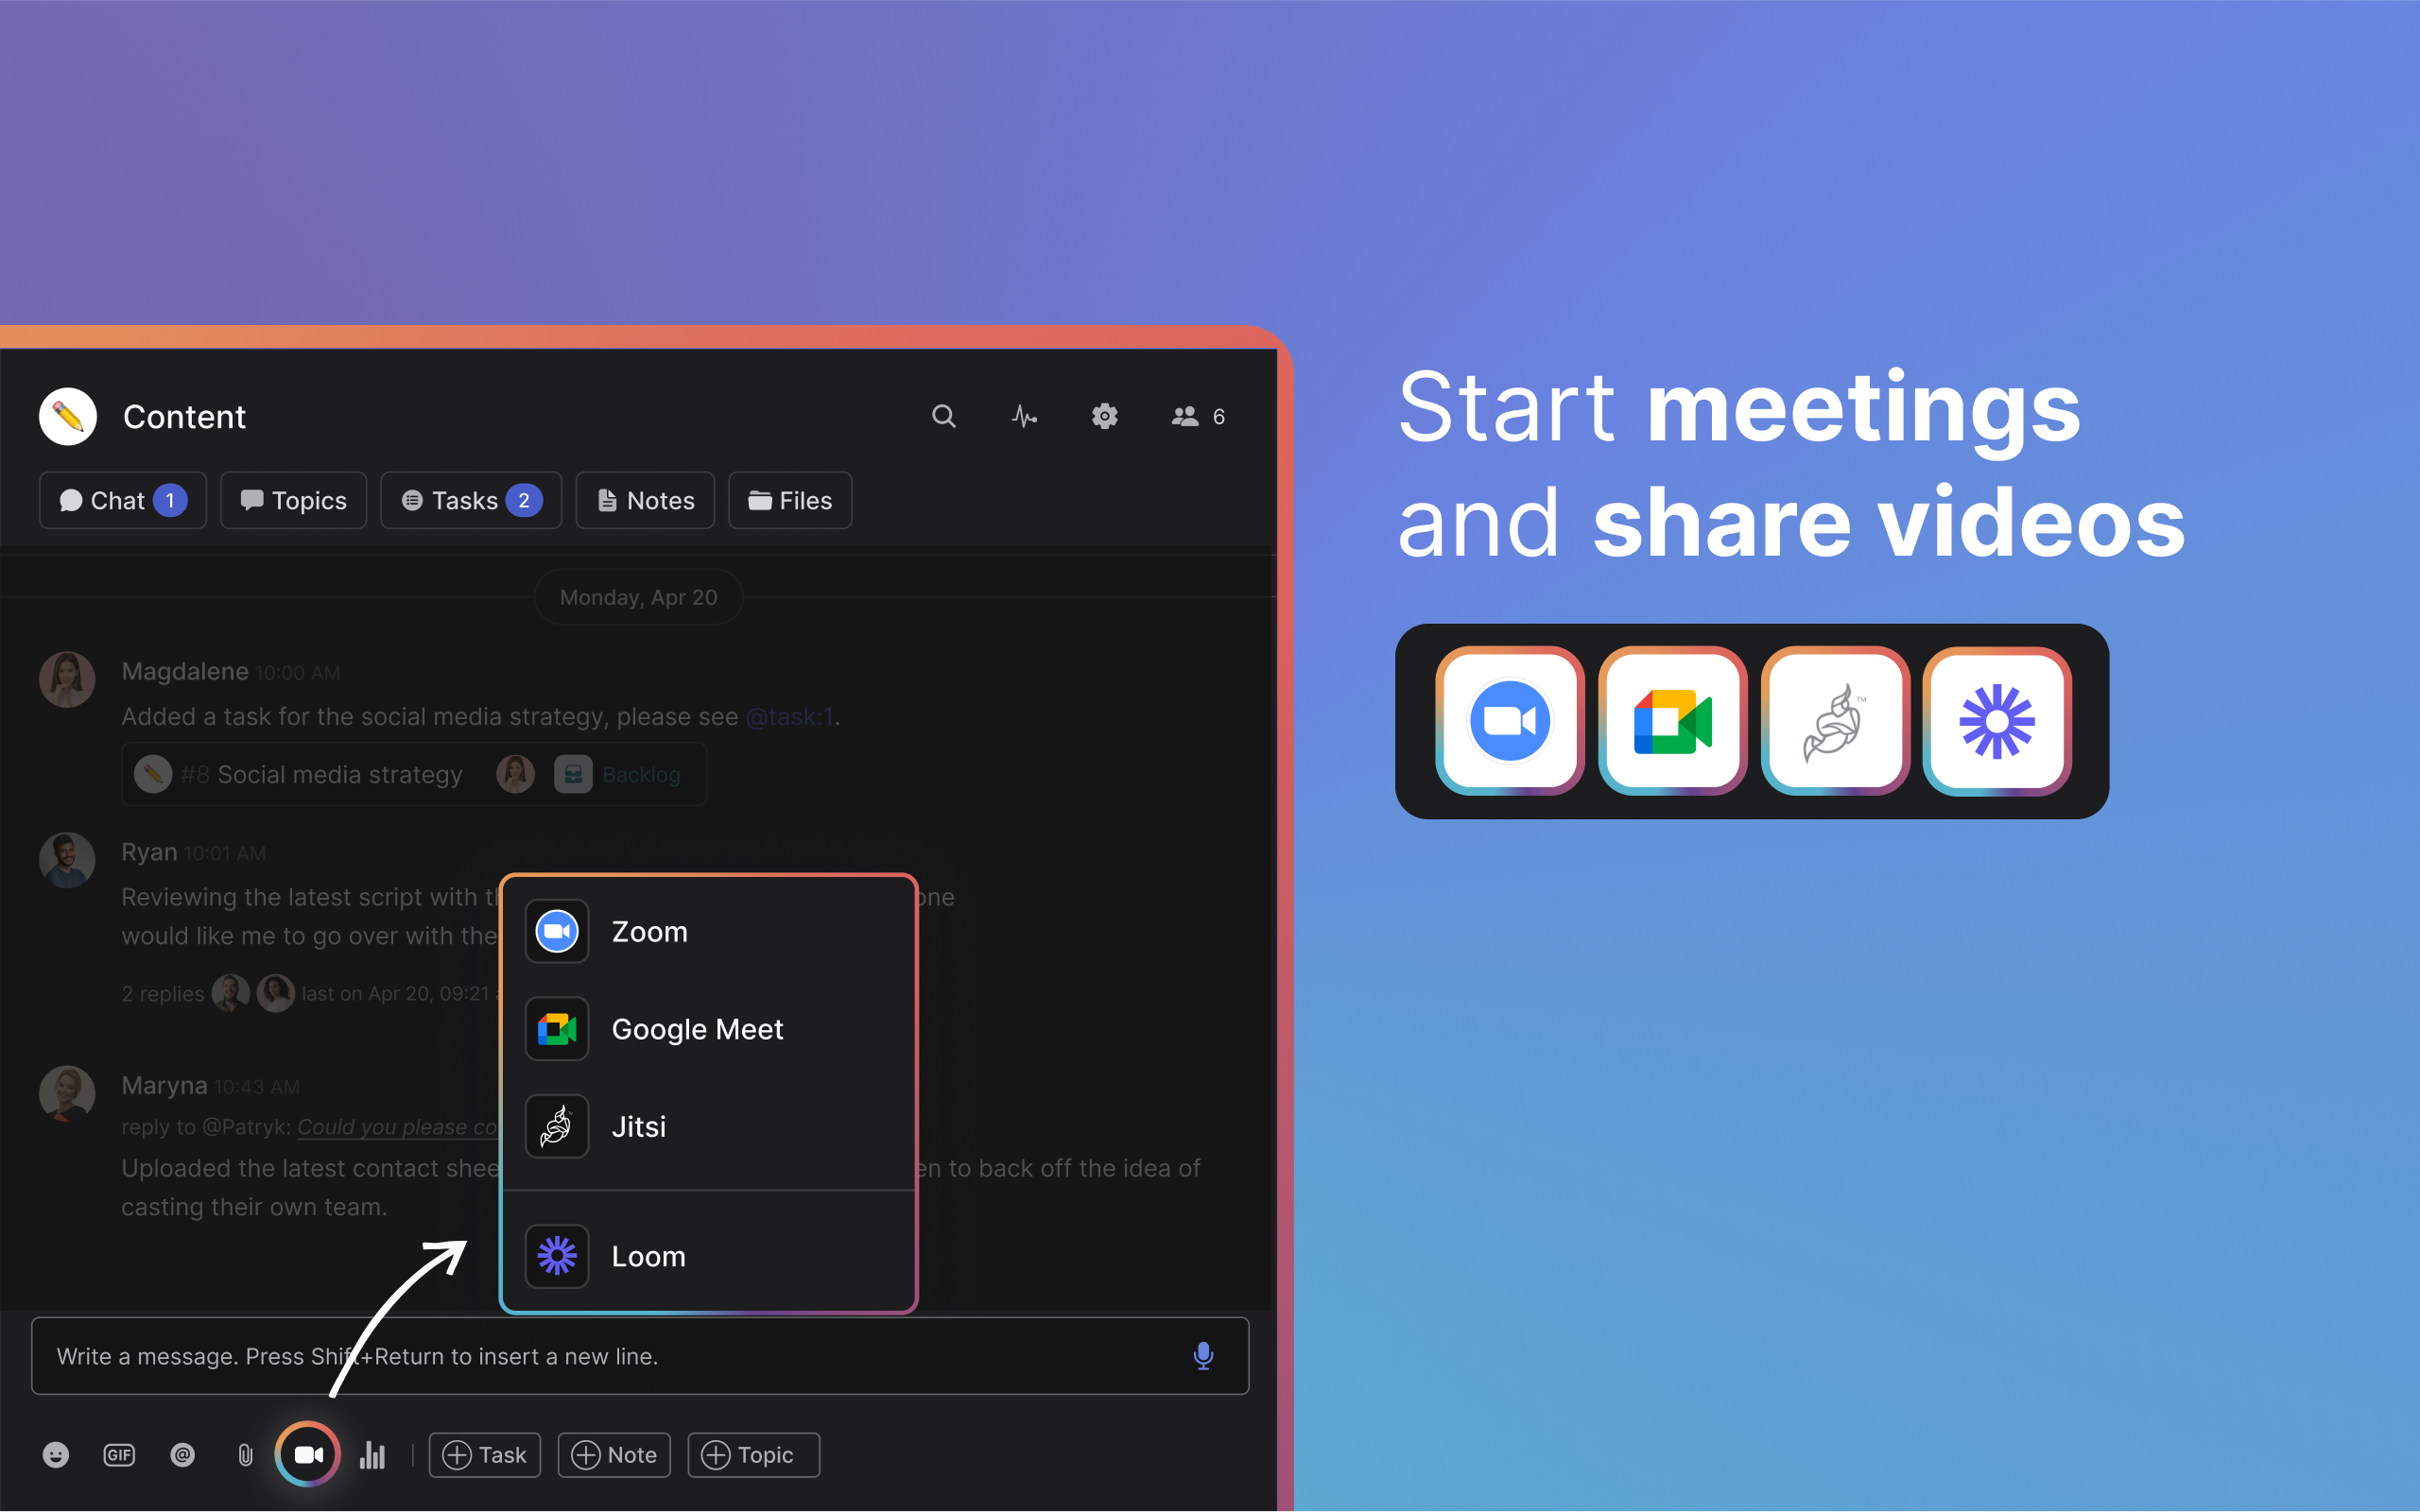 Start a meeting or record a video with the Meetings mini-app. Rock integrates with Zoom, Google Meet, Loom and Jitsi so you can stay connected with your team at all times.